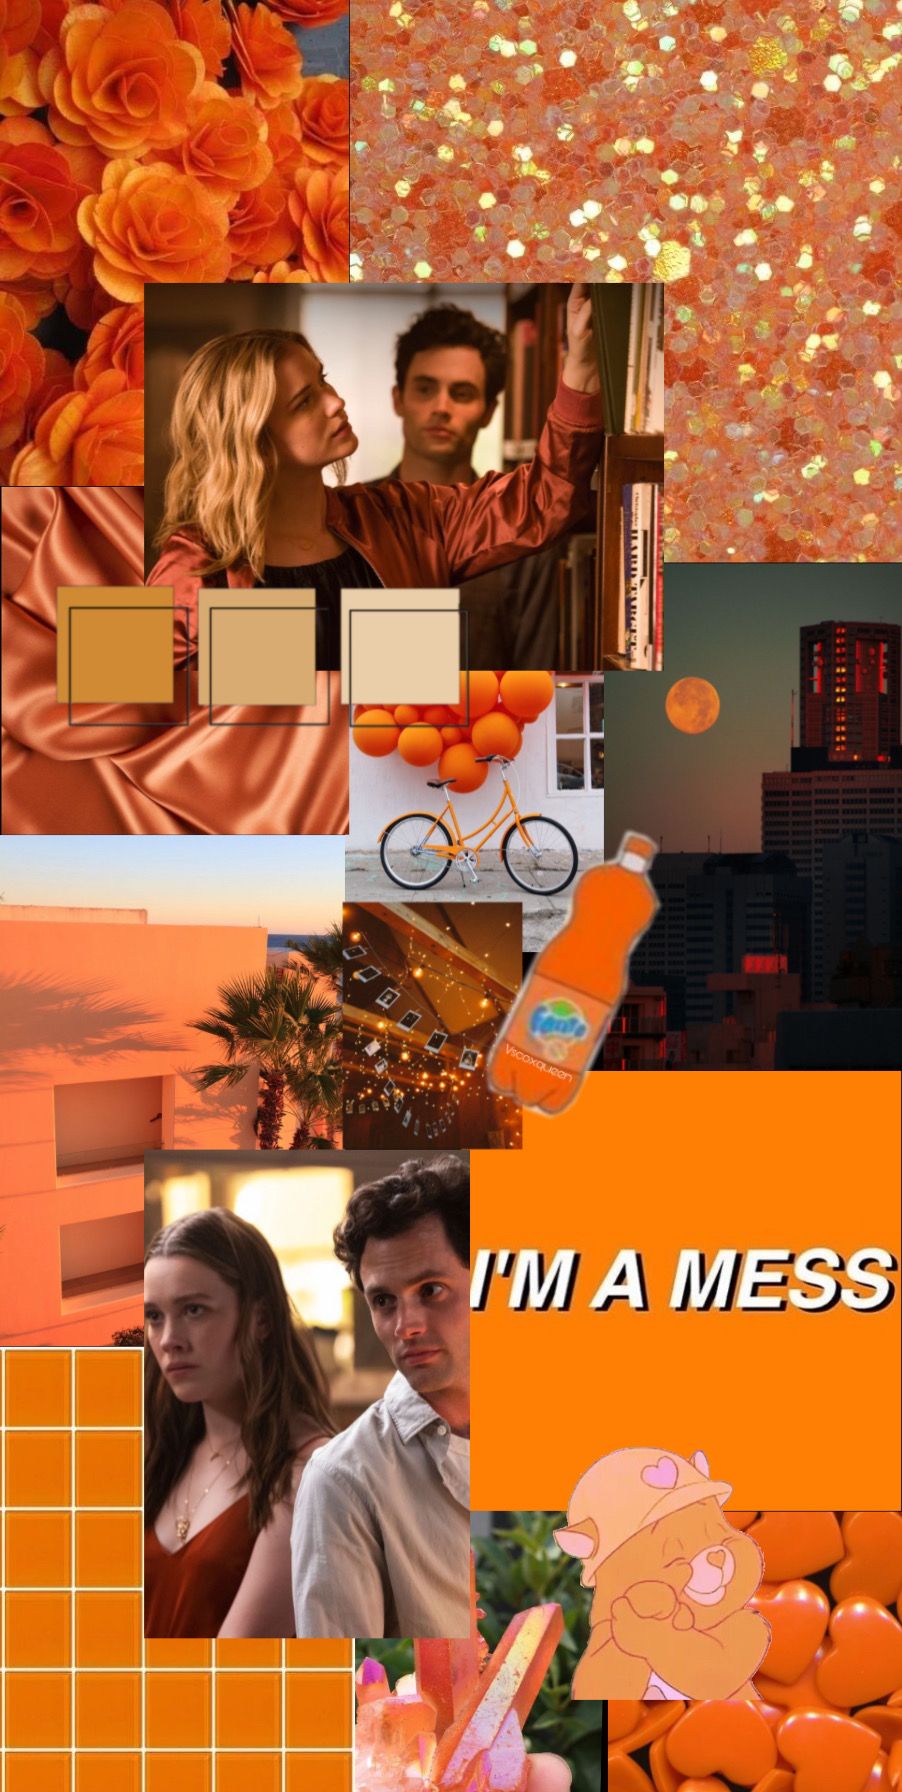 A collage of orange aesthetic images with the words 